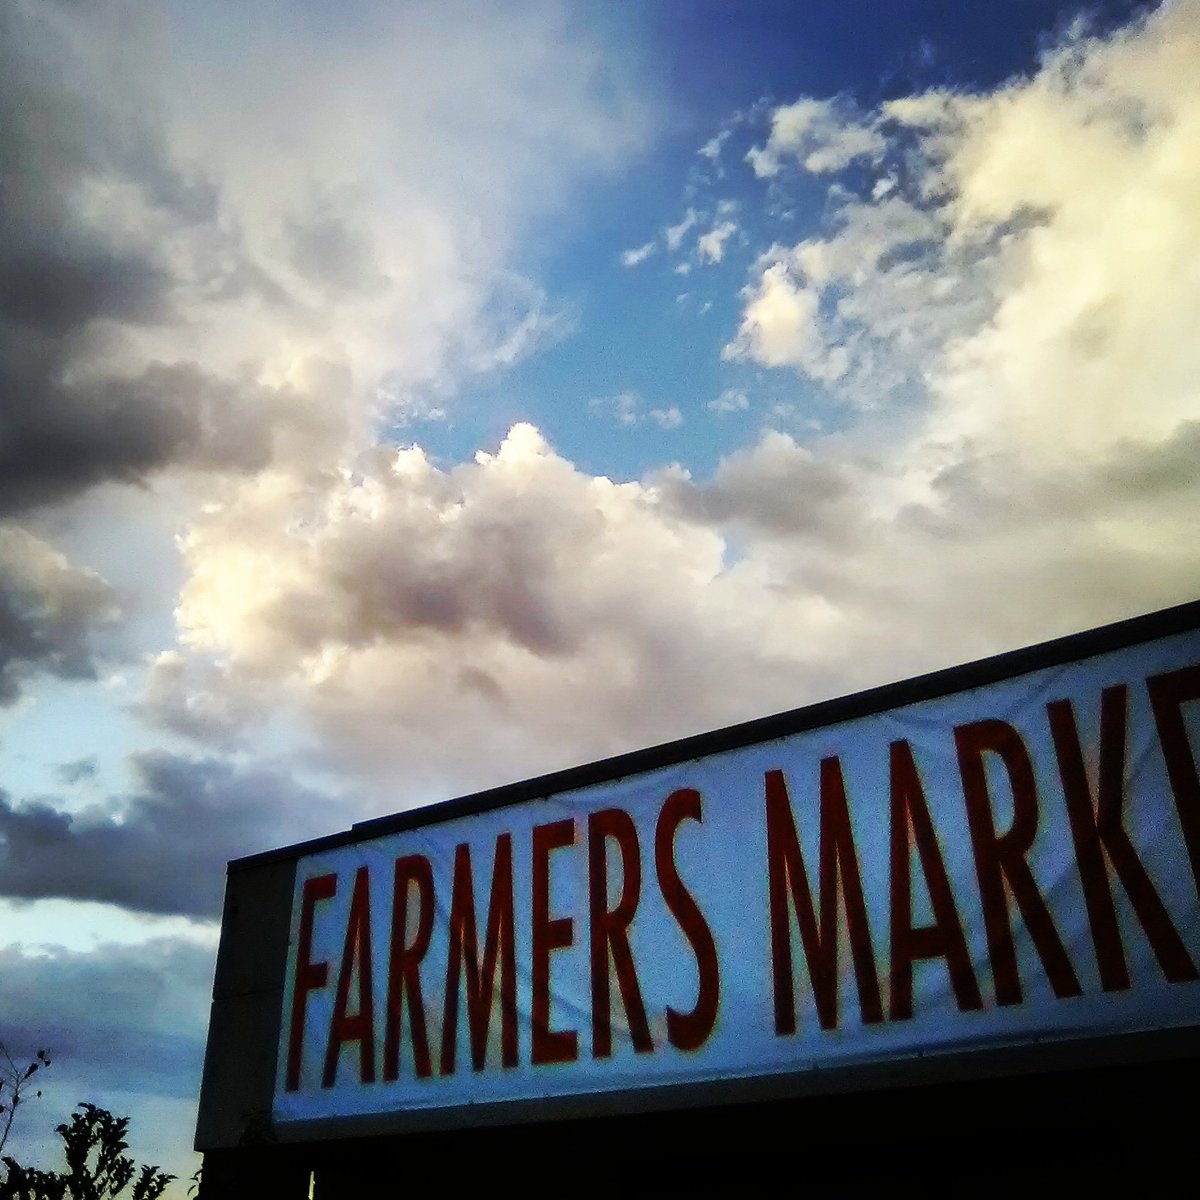 We'll be launching our retail at the #local #farmersmarkets next spring! Stay tuned for our progress! #boiseevents #smallbiz #startup #locallysourced #pastry #supportlocal #chef #pastrychefsofig #idaho